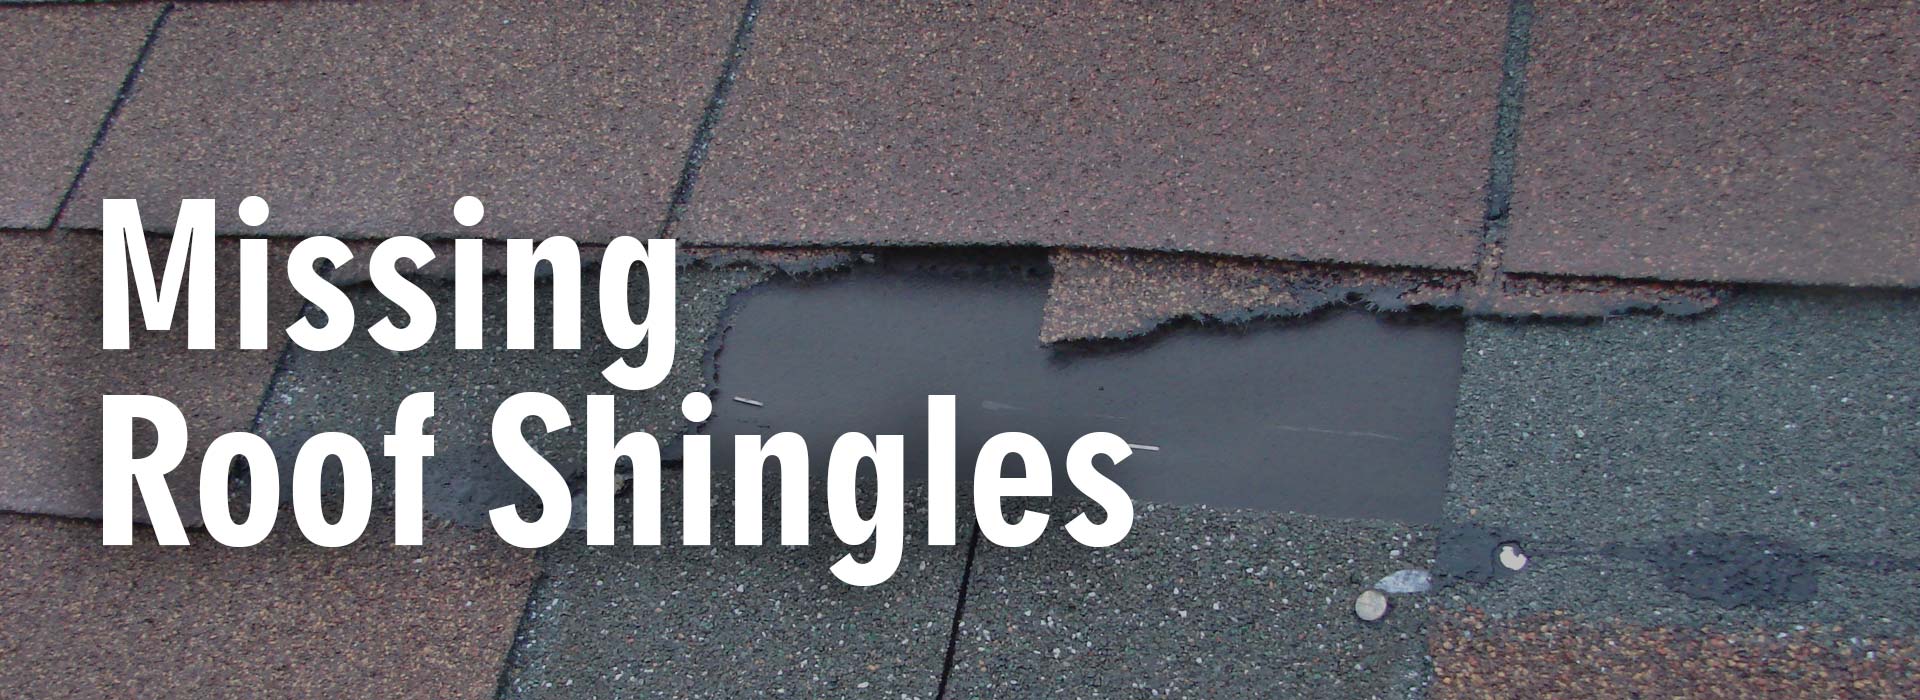 Missing Roof Shingles in nyc